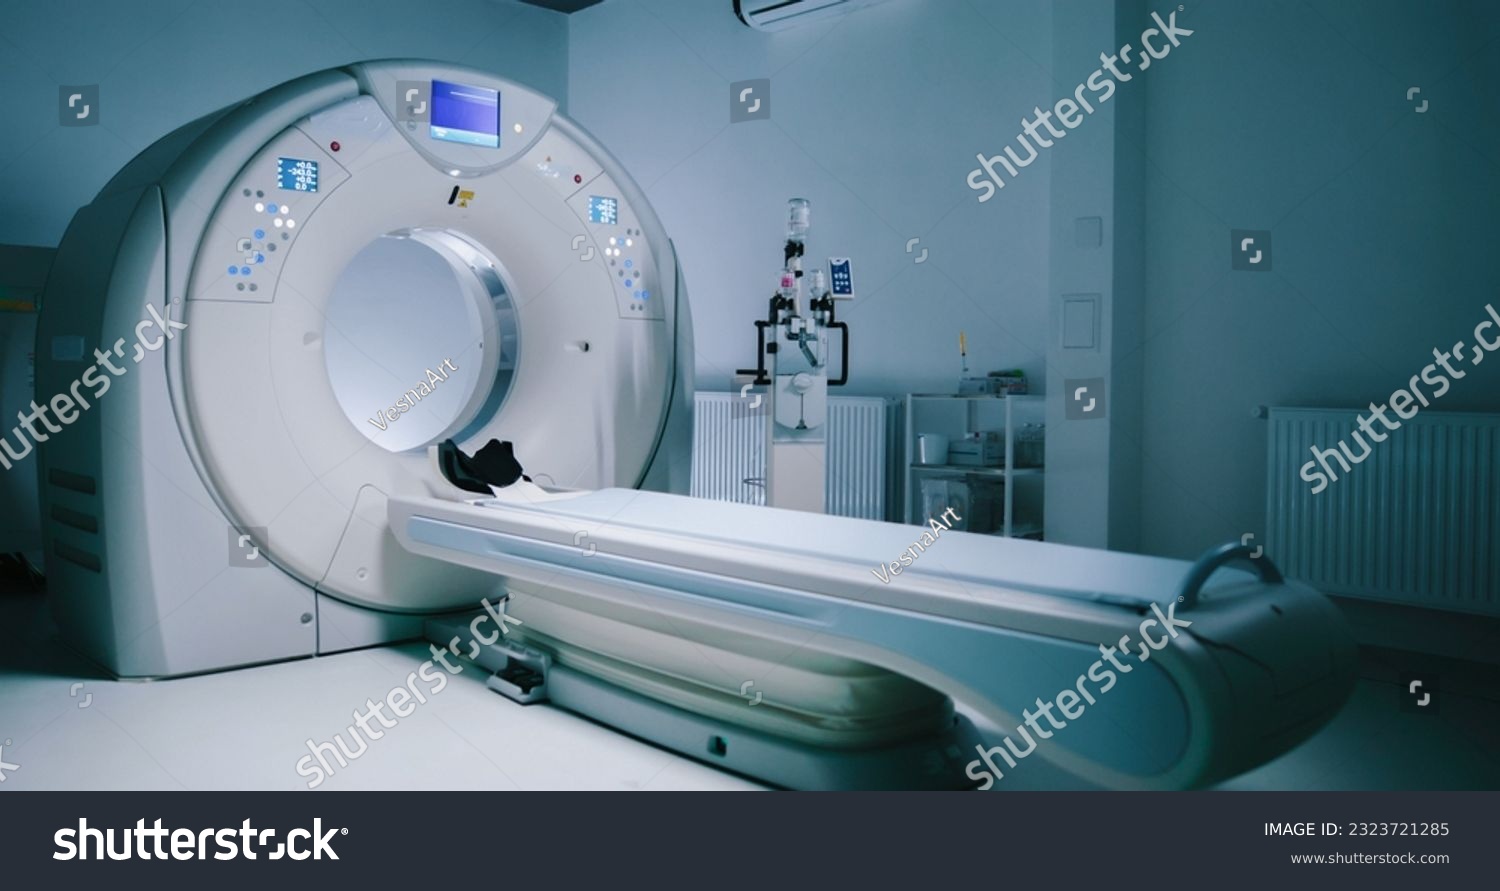 Shoot without people. View of steryl tomography room. Medical equipment for MRI. Scanning capsule for magnetic resonance imaging sexamination. Modernly equipped brain MRI room. #2323721285